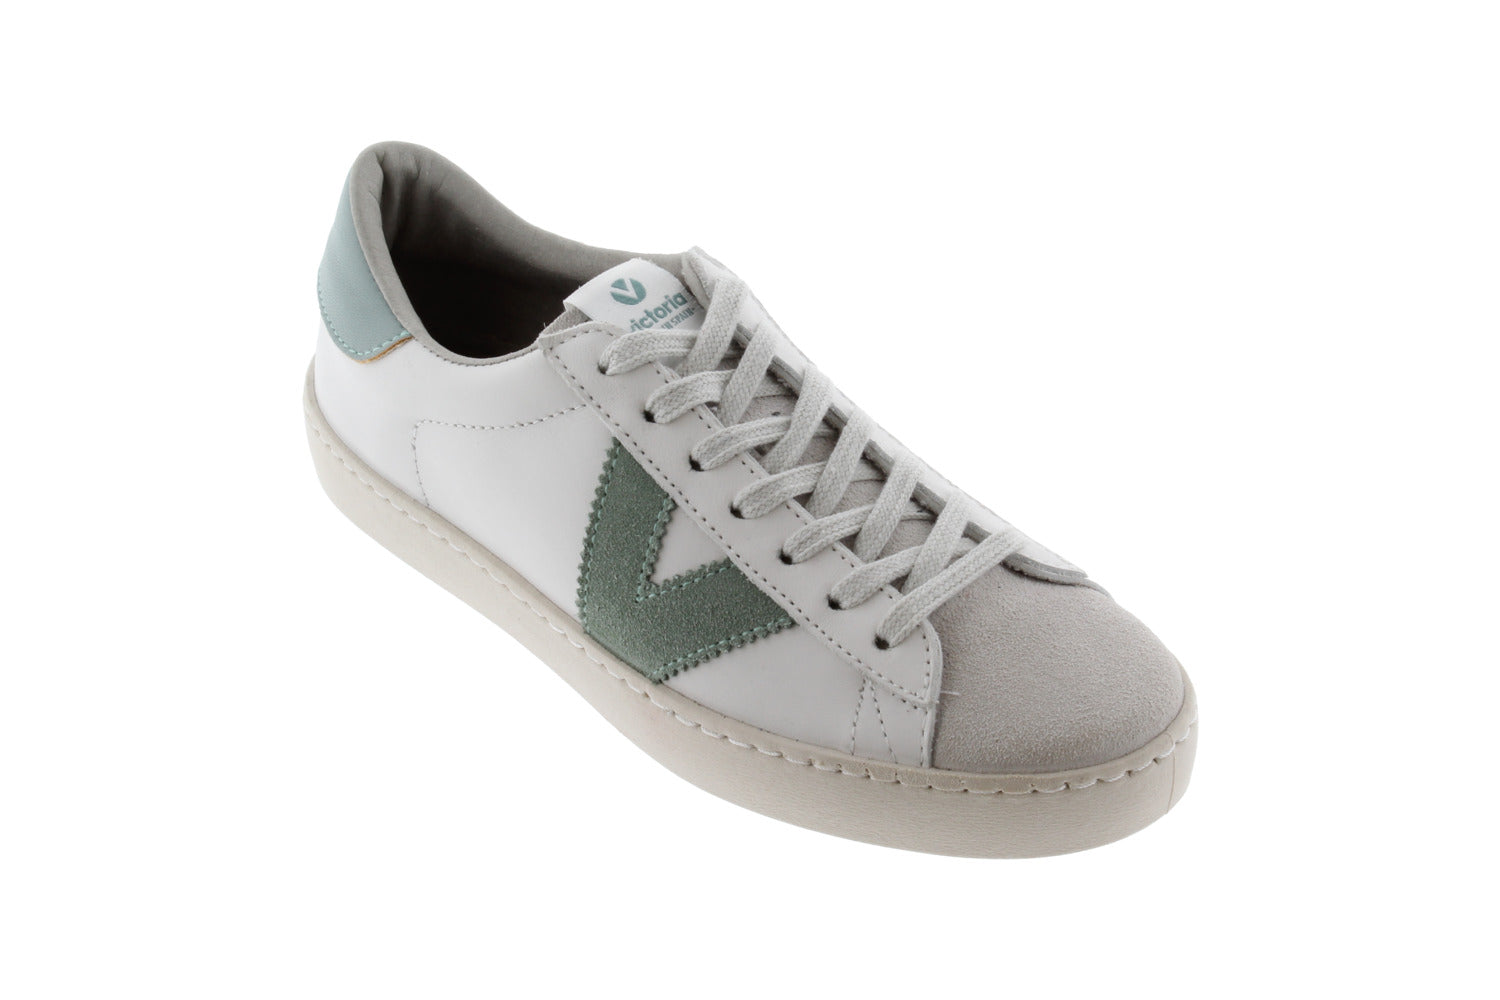 Victoria Berlin Piel 1126142 Ladies Spanish Jade Green Leather Lace Up Trainers